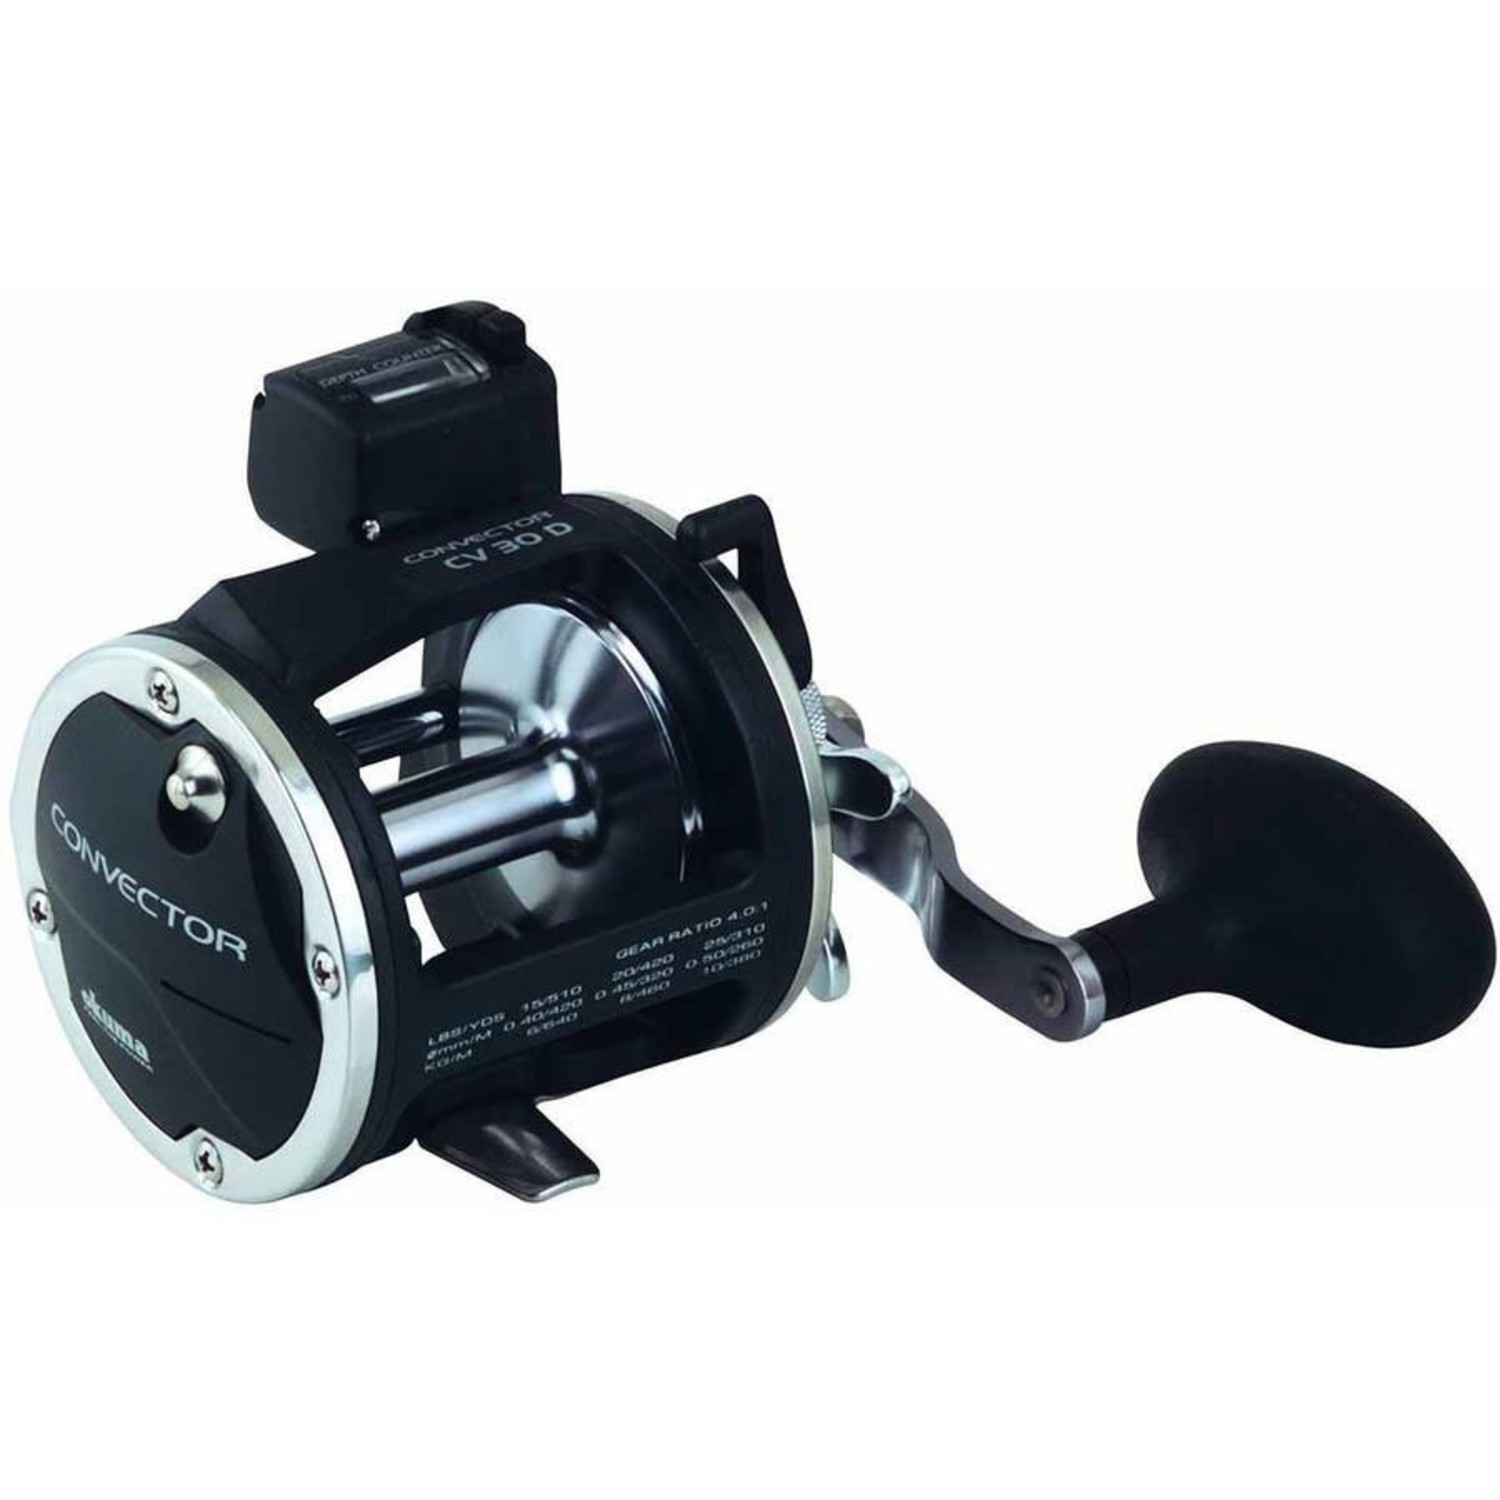 convector 30-size left hand linecounter reel - OutfitterSSM